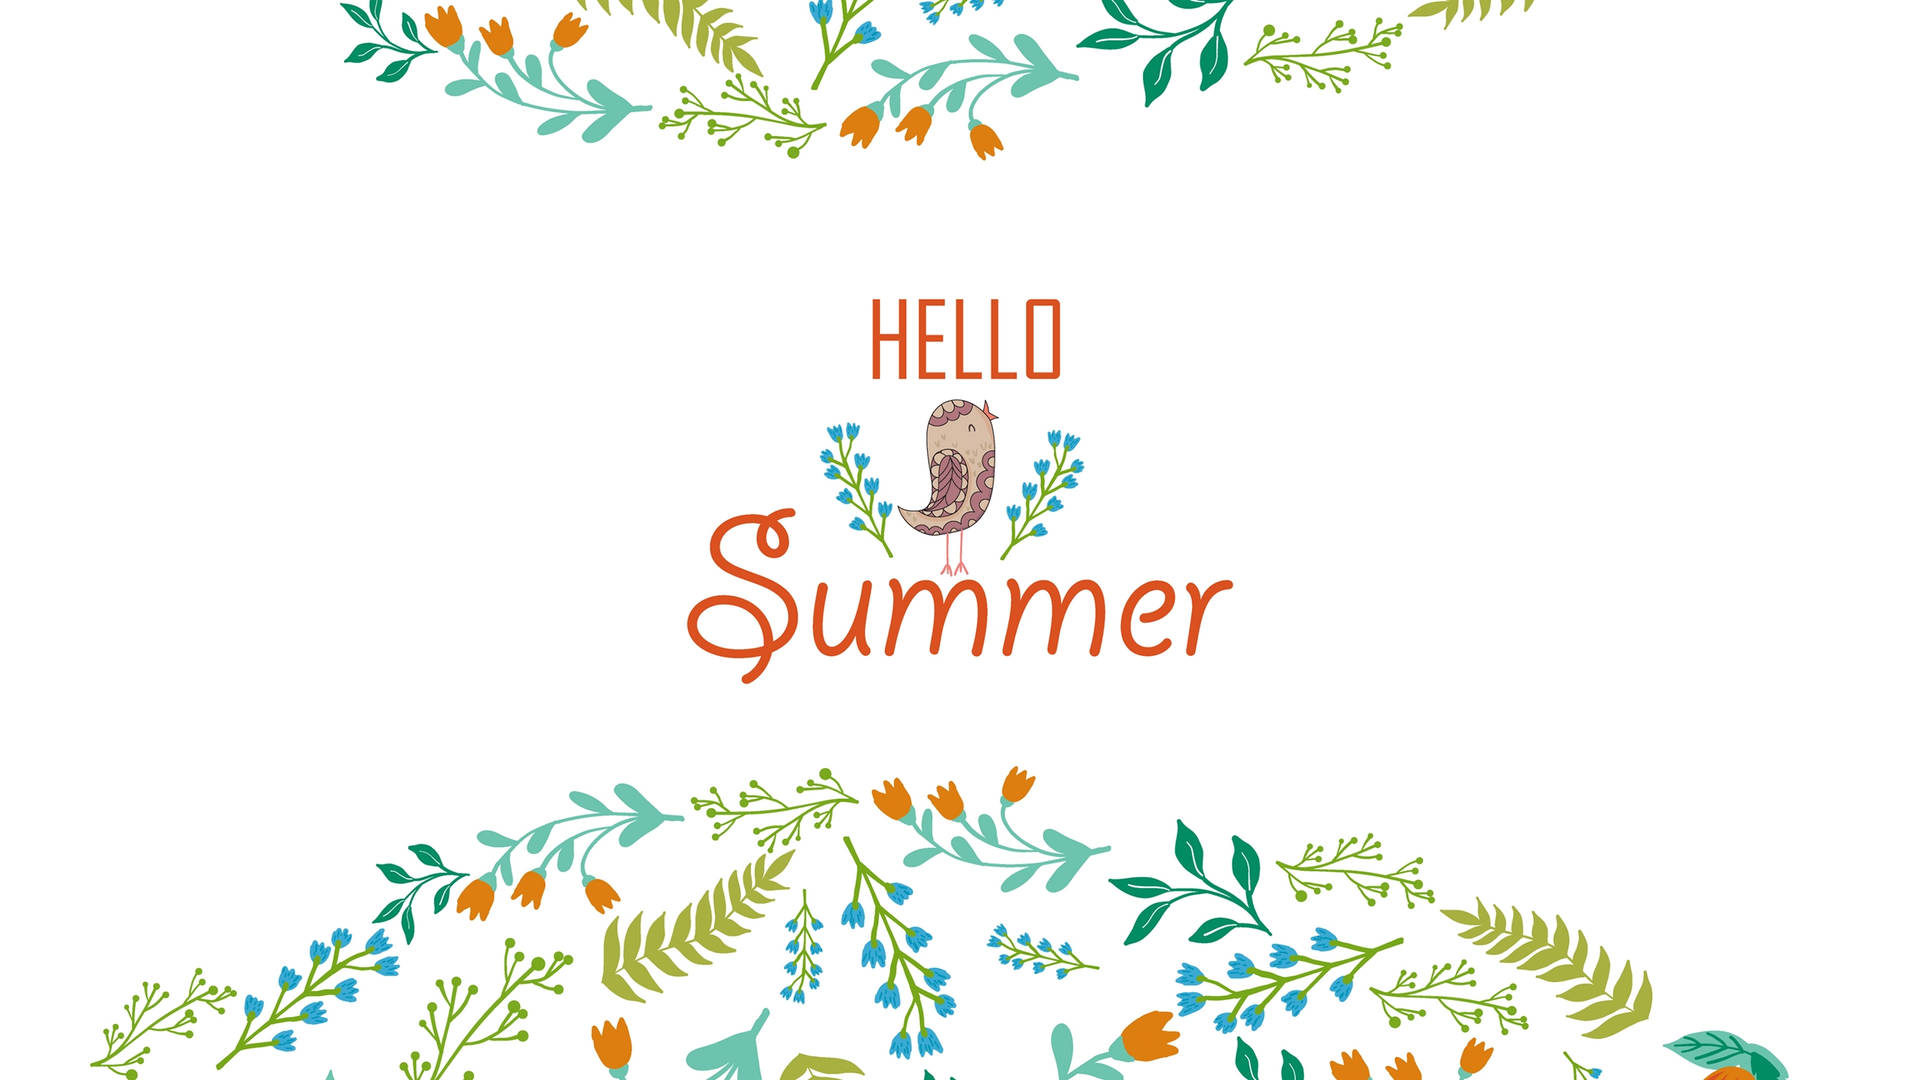 Hello Summer Greeting With Floral Design Background